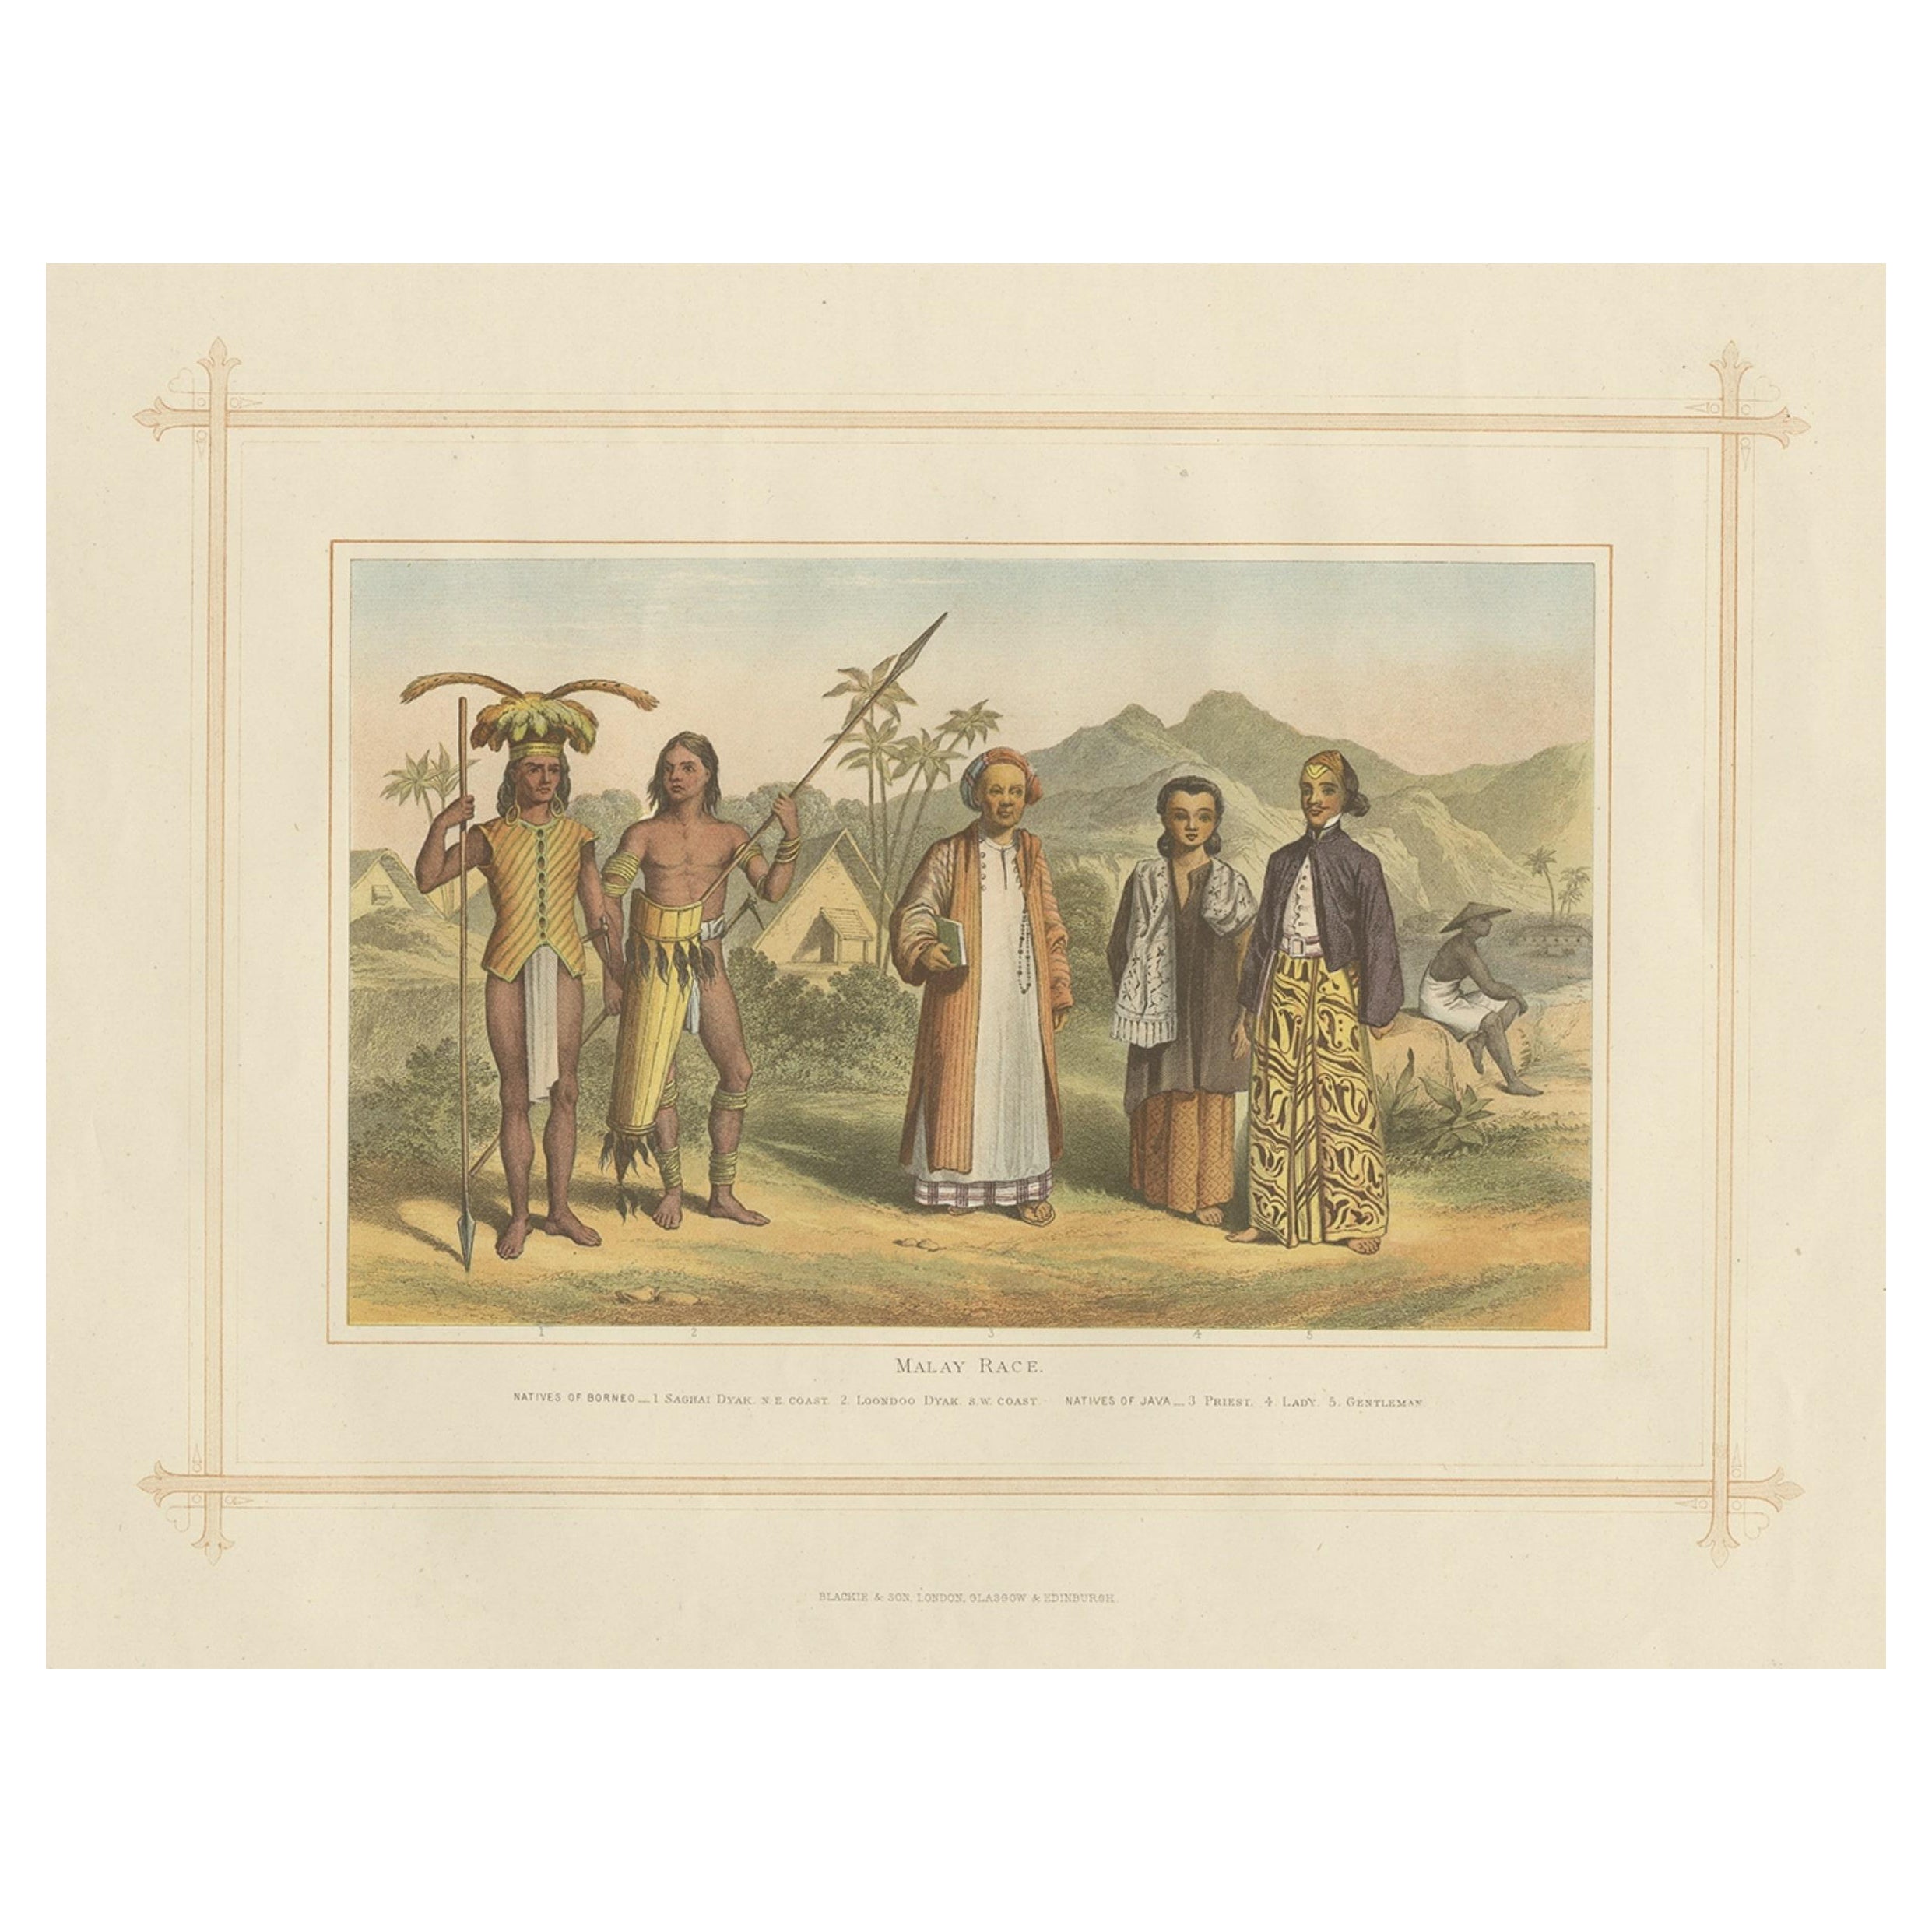 Antique Chromolithograph Depicting Native Malays, Incl Dayaks of Borneo, 1882